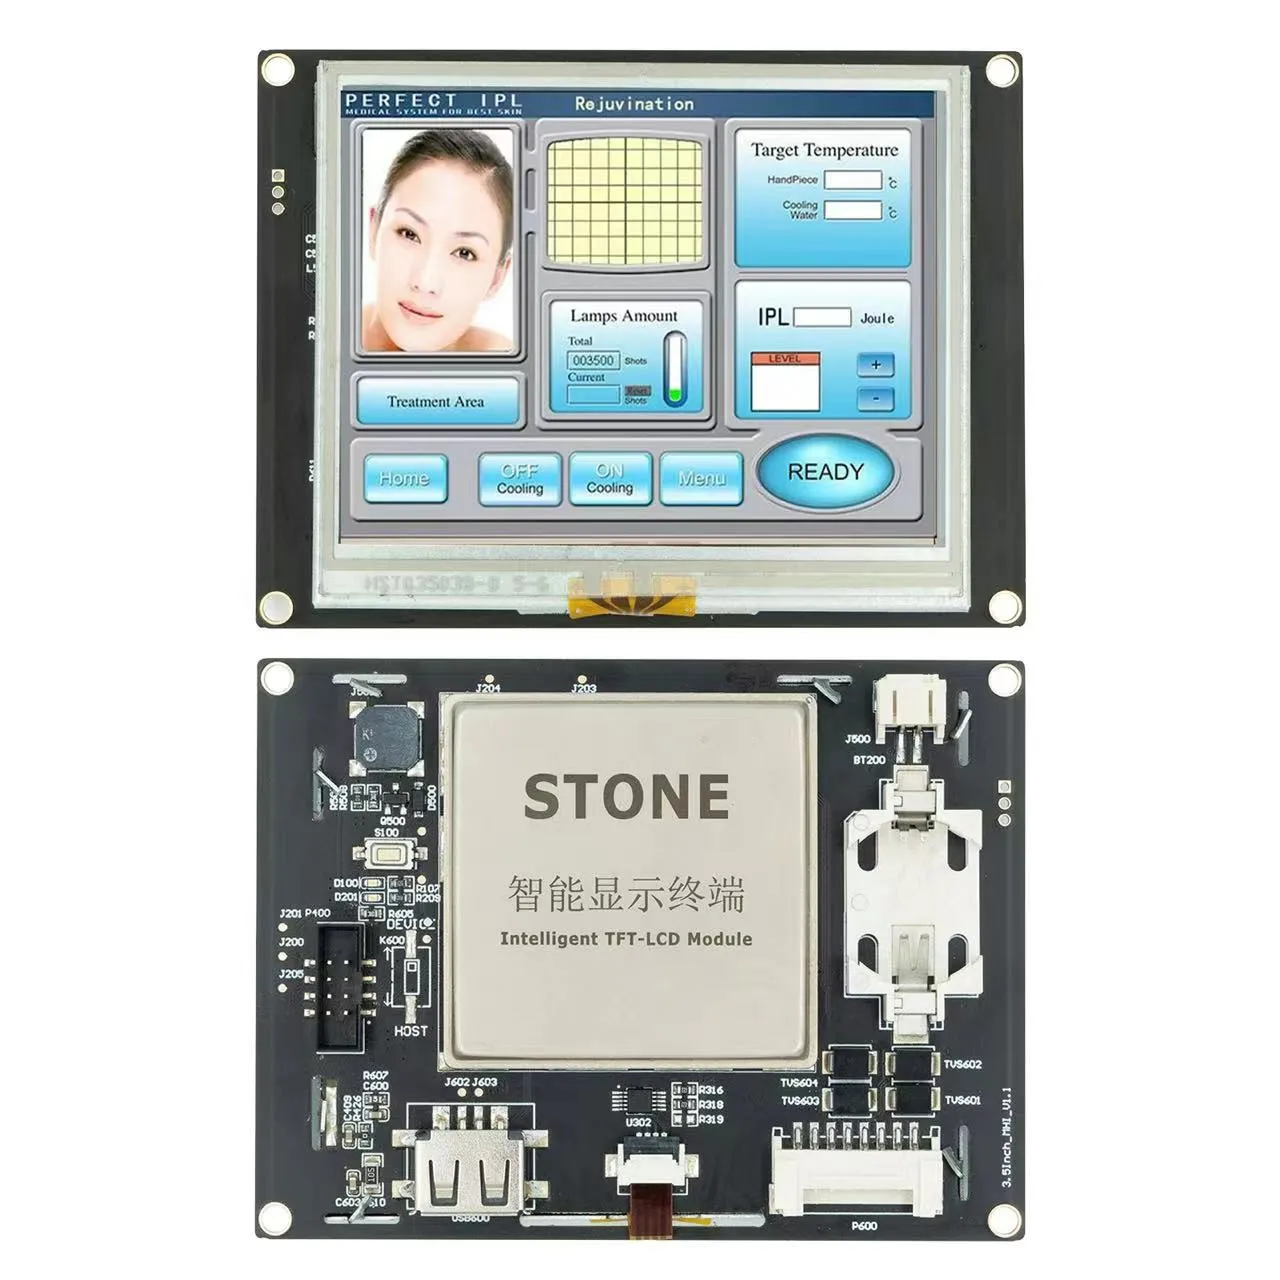 SCBRHMI LCD Touch Basic Display STWI035WT-01 - 3.5 TFT Intelligent Resistive Touch Screen Module Display